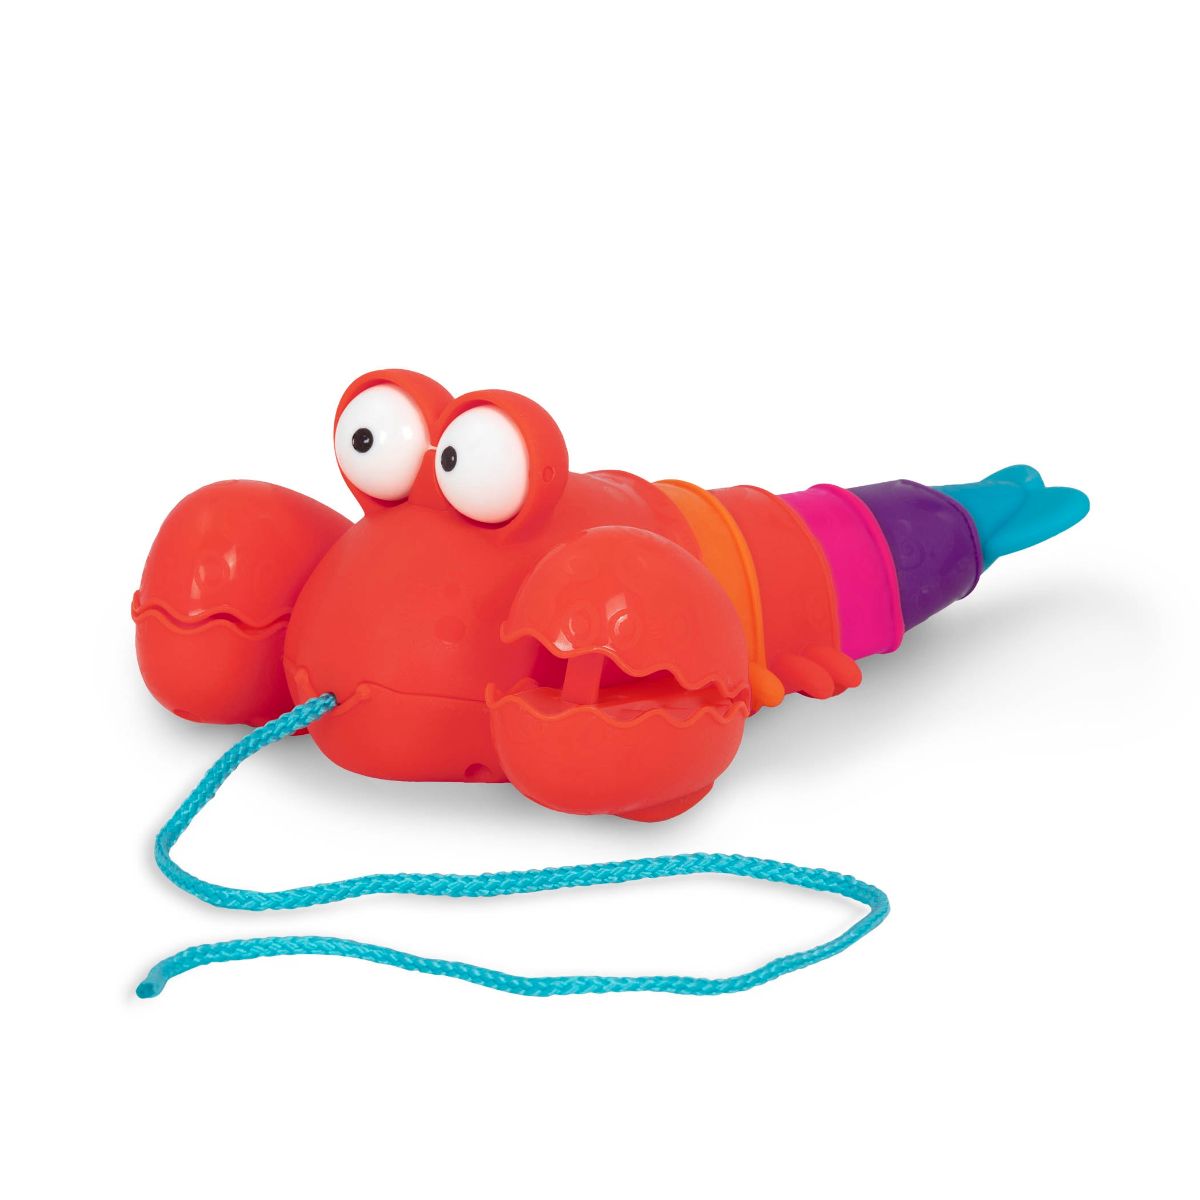 Pull-along lobster toy.